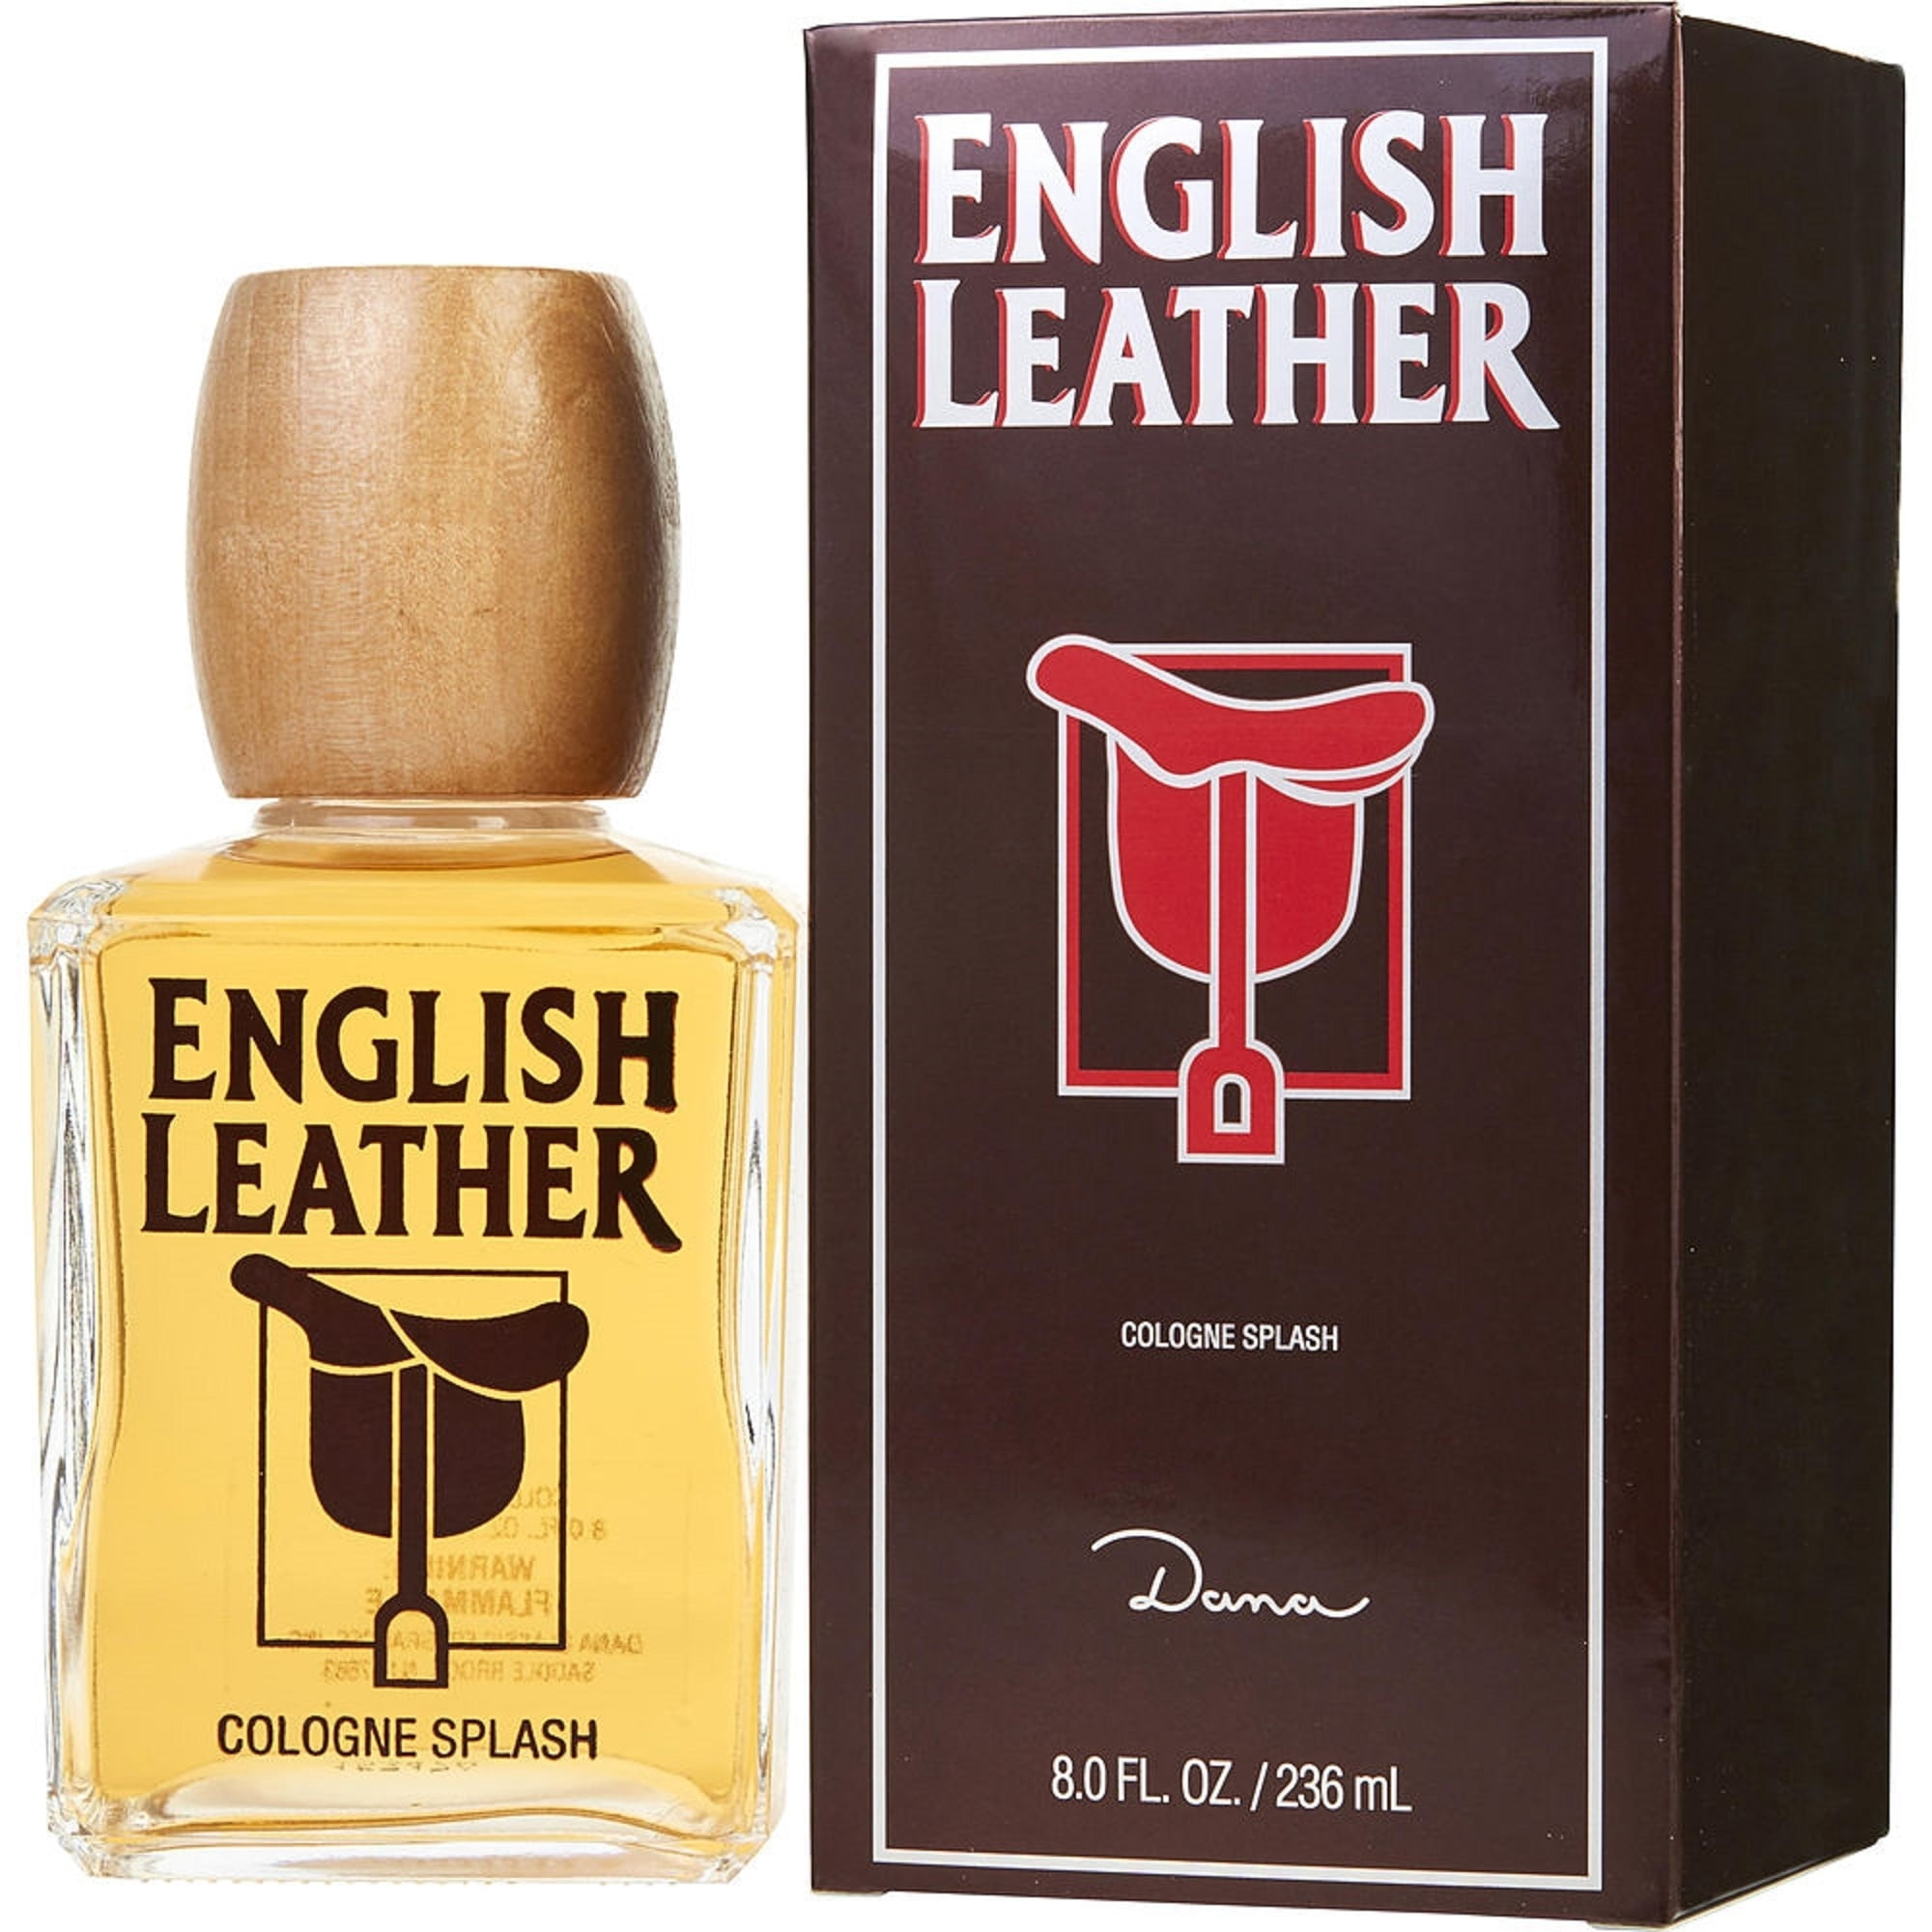 English Leather Black English Leather cologne - a fragrance for men 2007